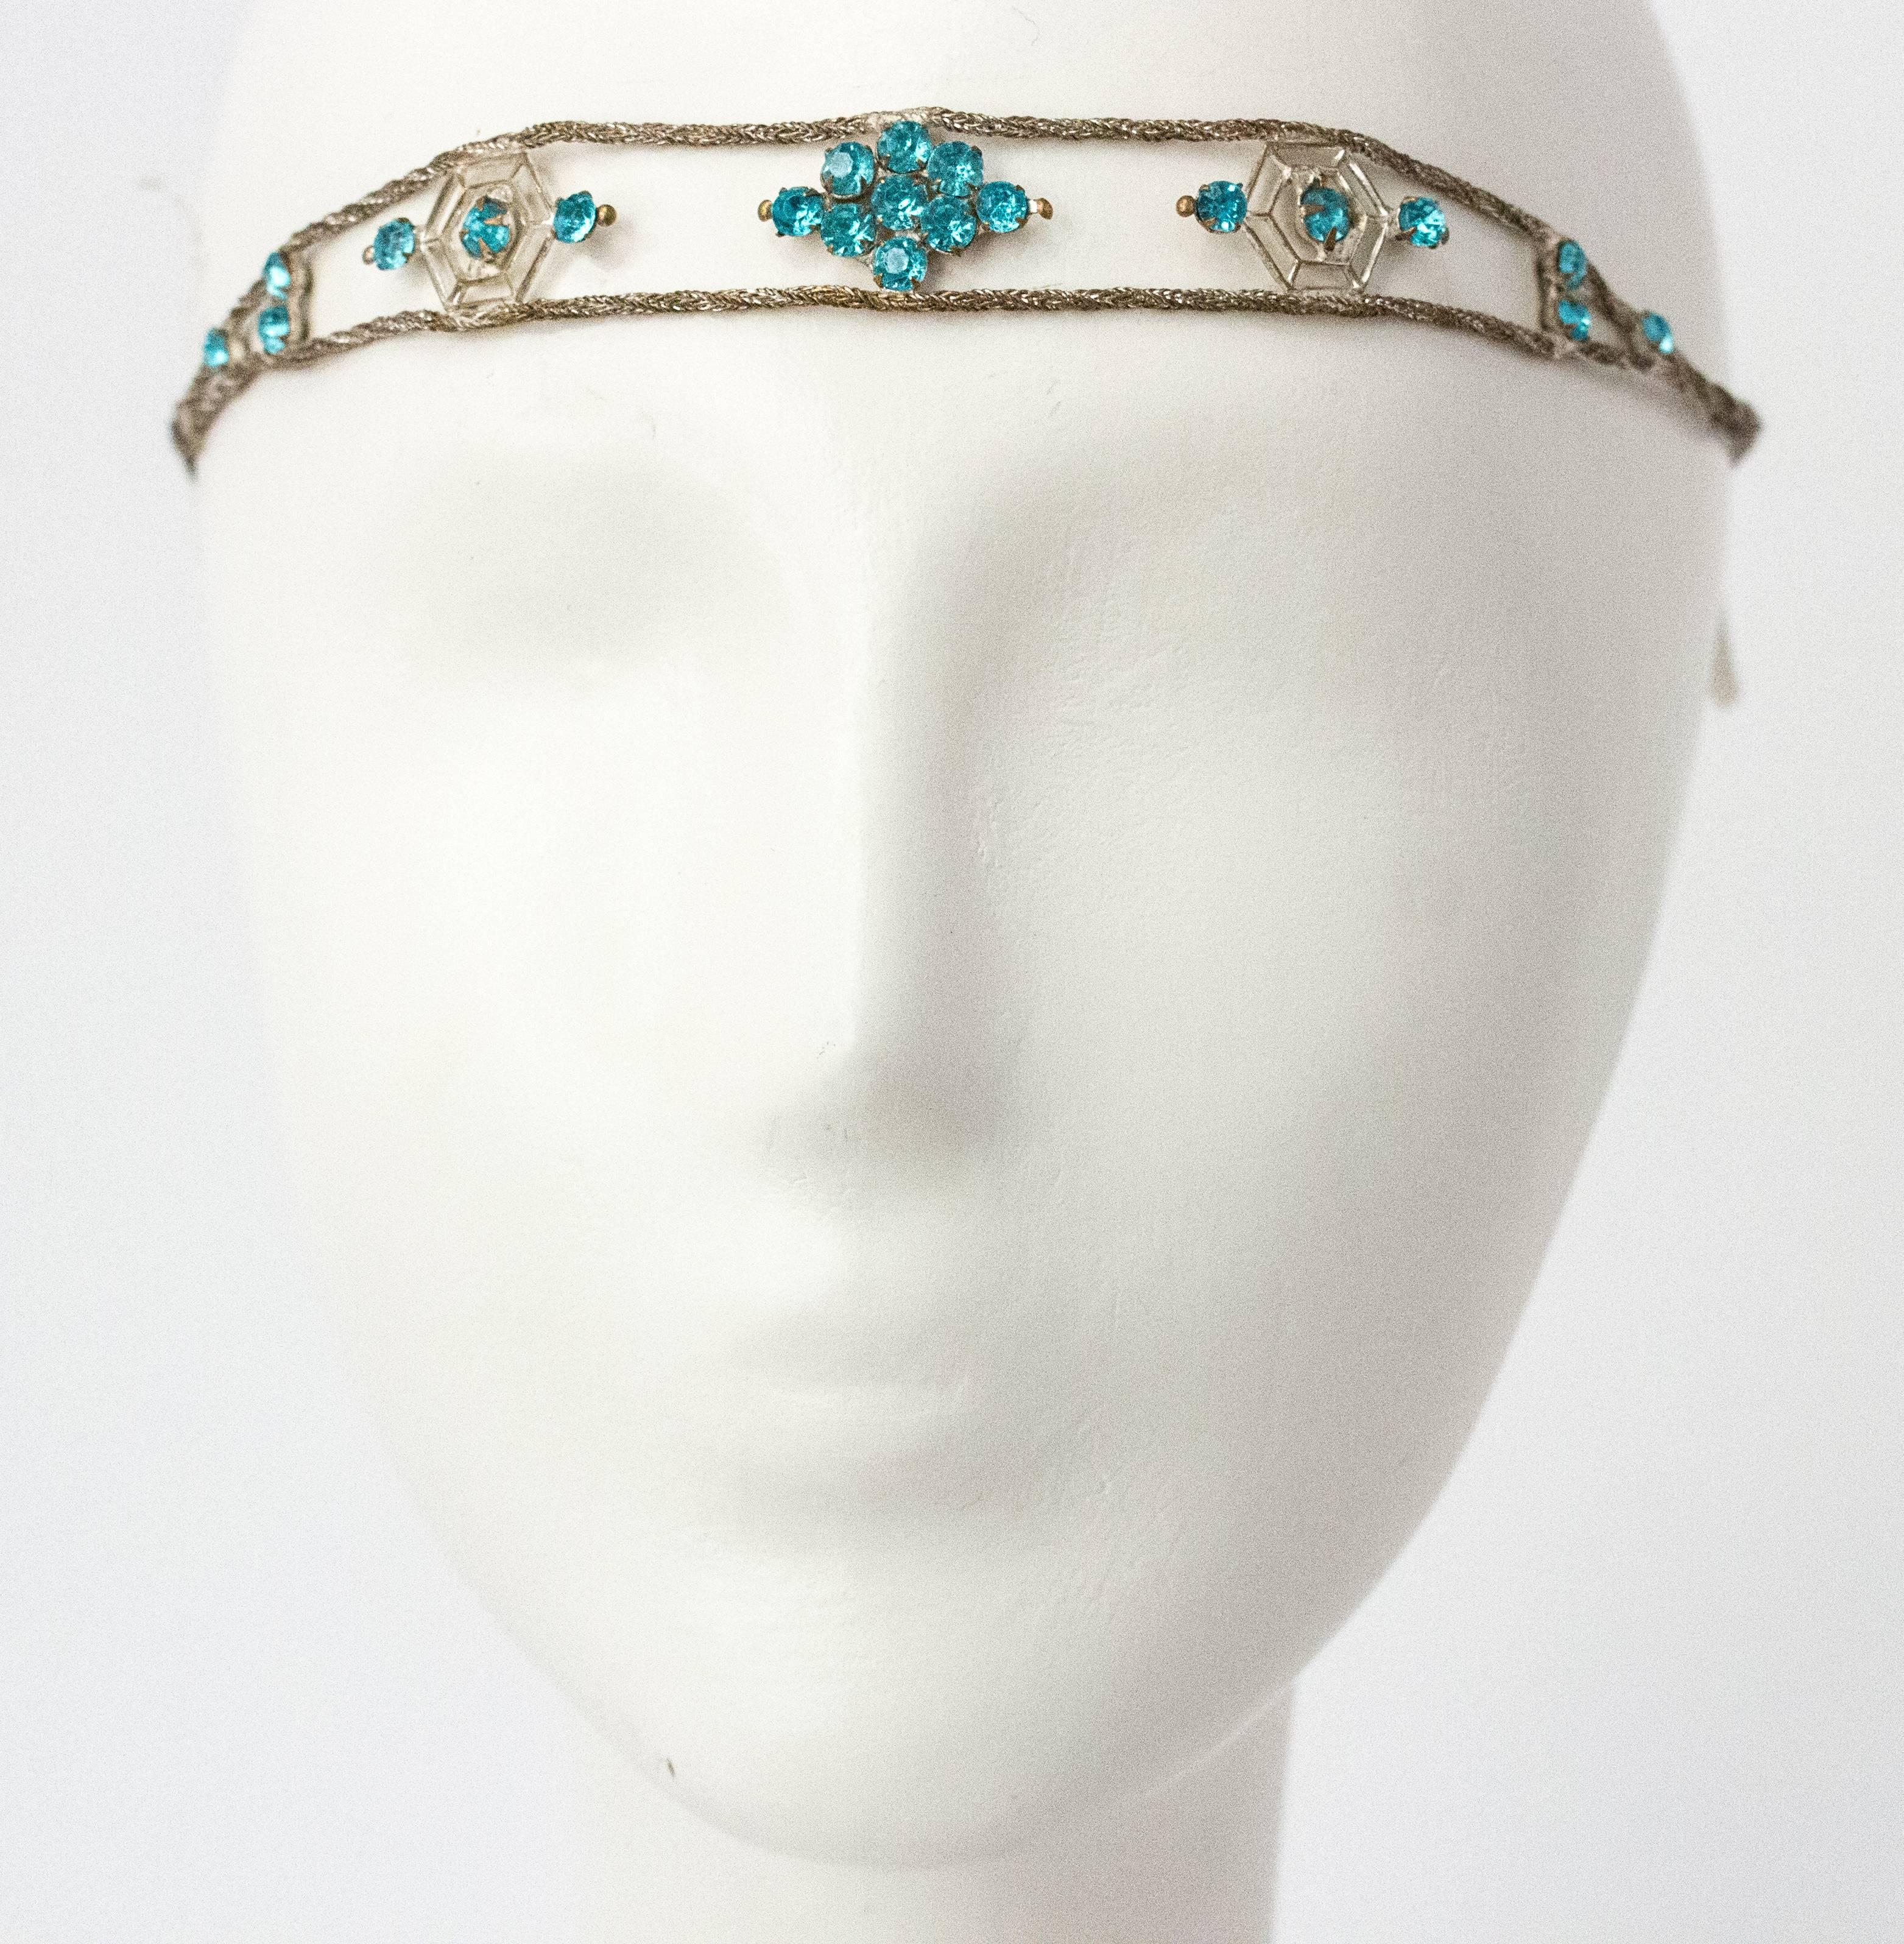 20s headpiece has gold and Silver lamé braided ribbon which ties in the back so it is completely adjustable